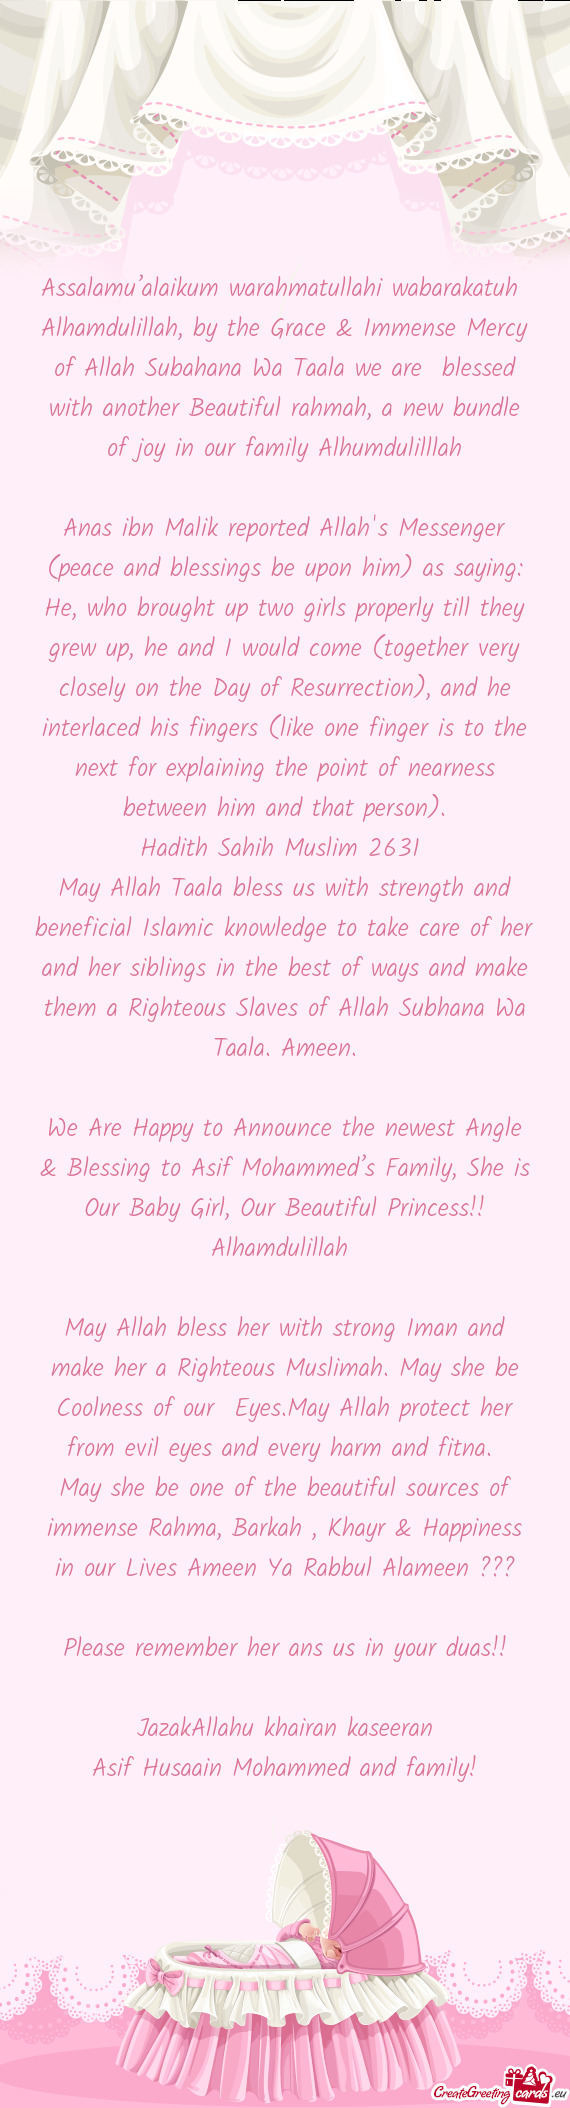 We Are Happy to Announce the newest Angle & Blessing to Asif Mohammed’s Family, She is Our Baby Gi